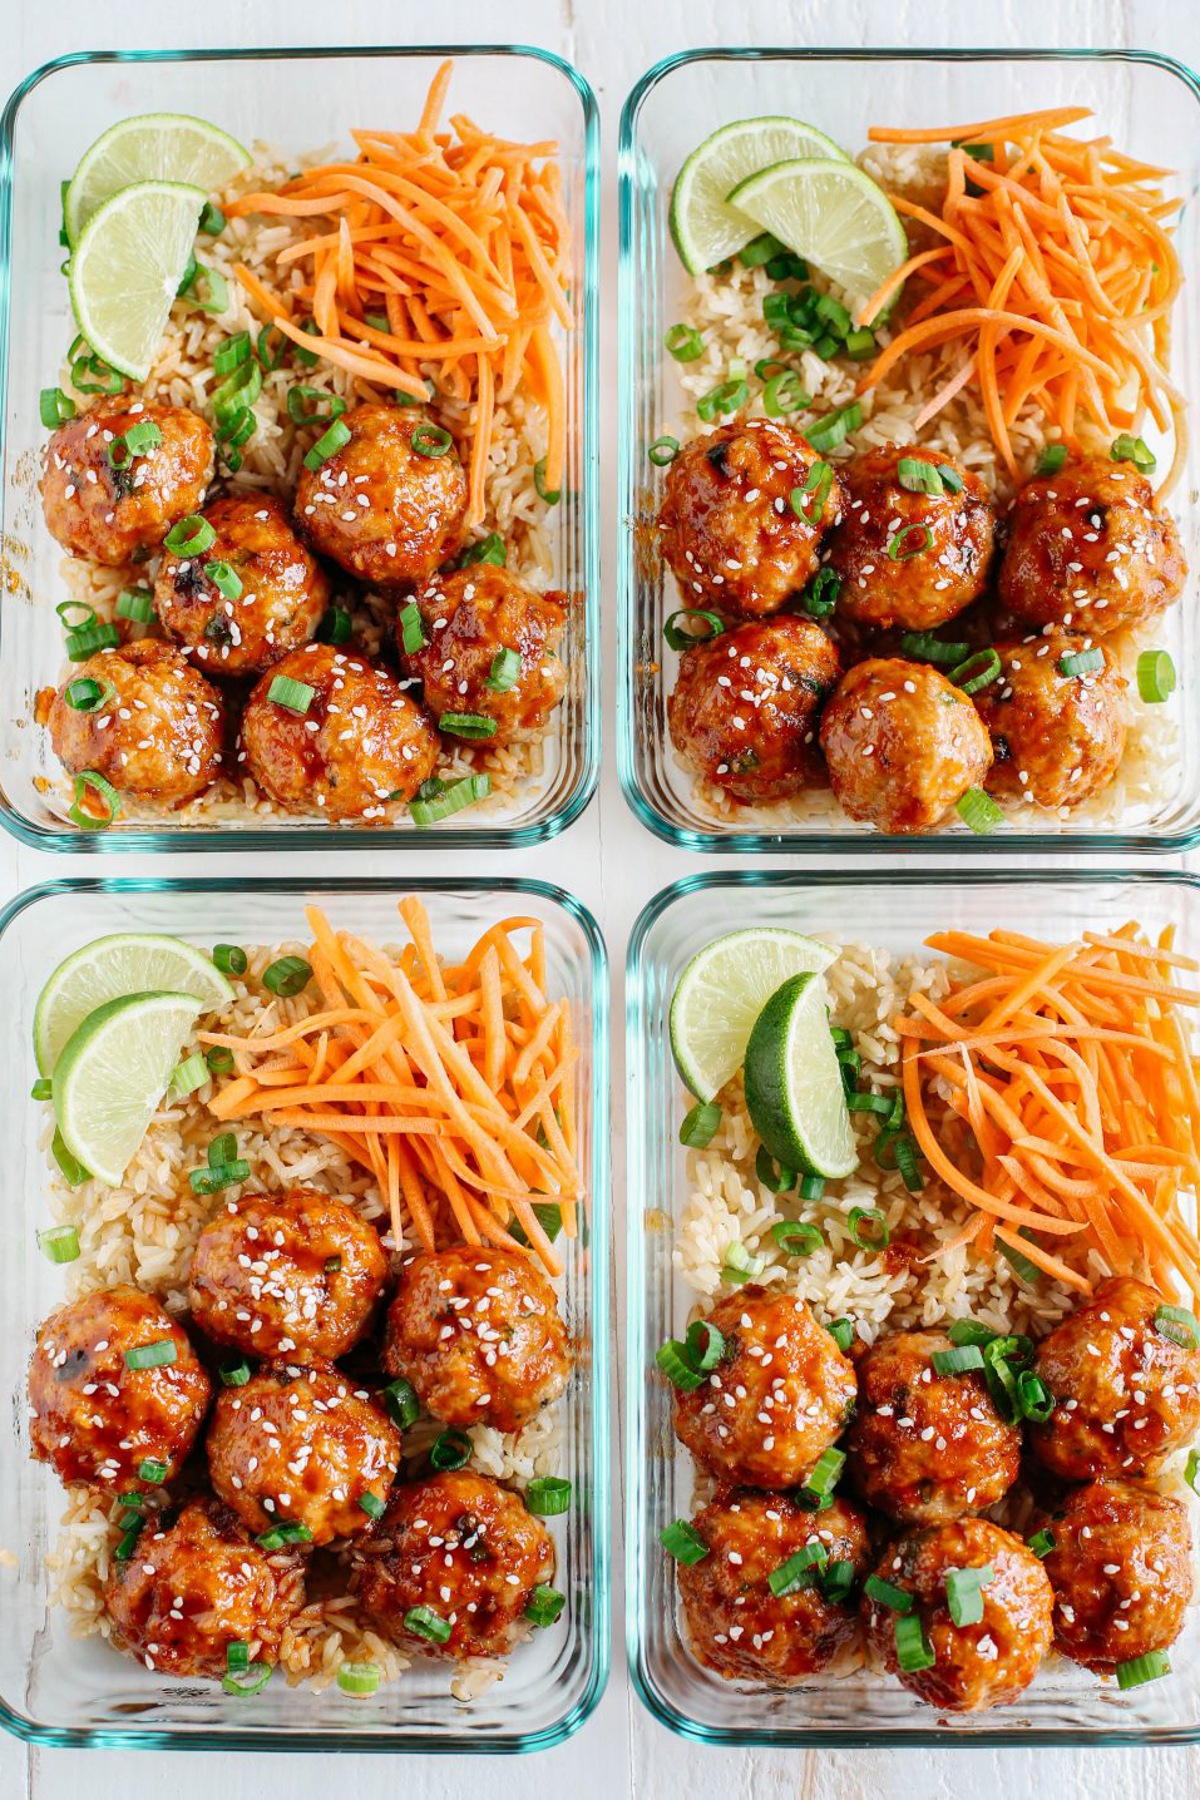 Meatballs in four glass meal prep containers with carrots and zucchini noodles.